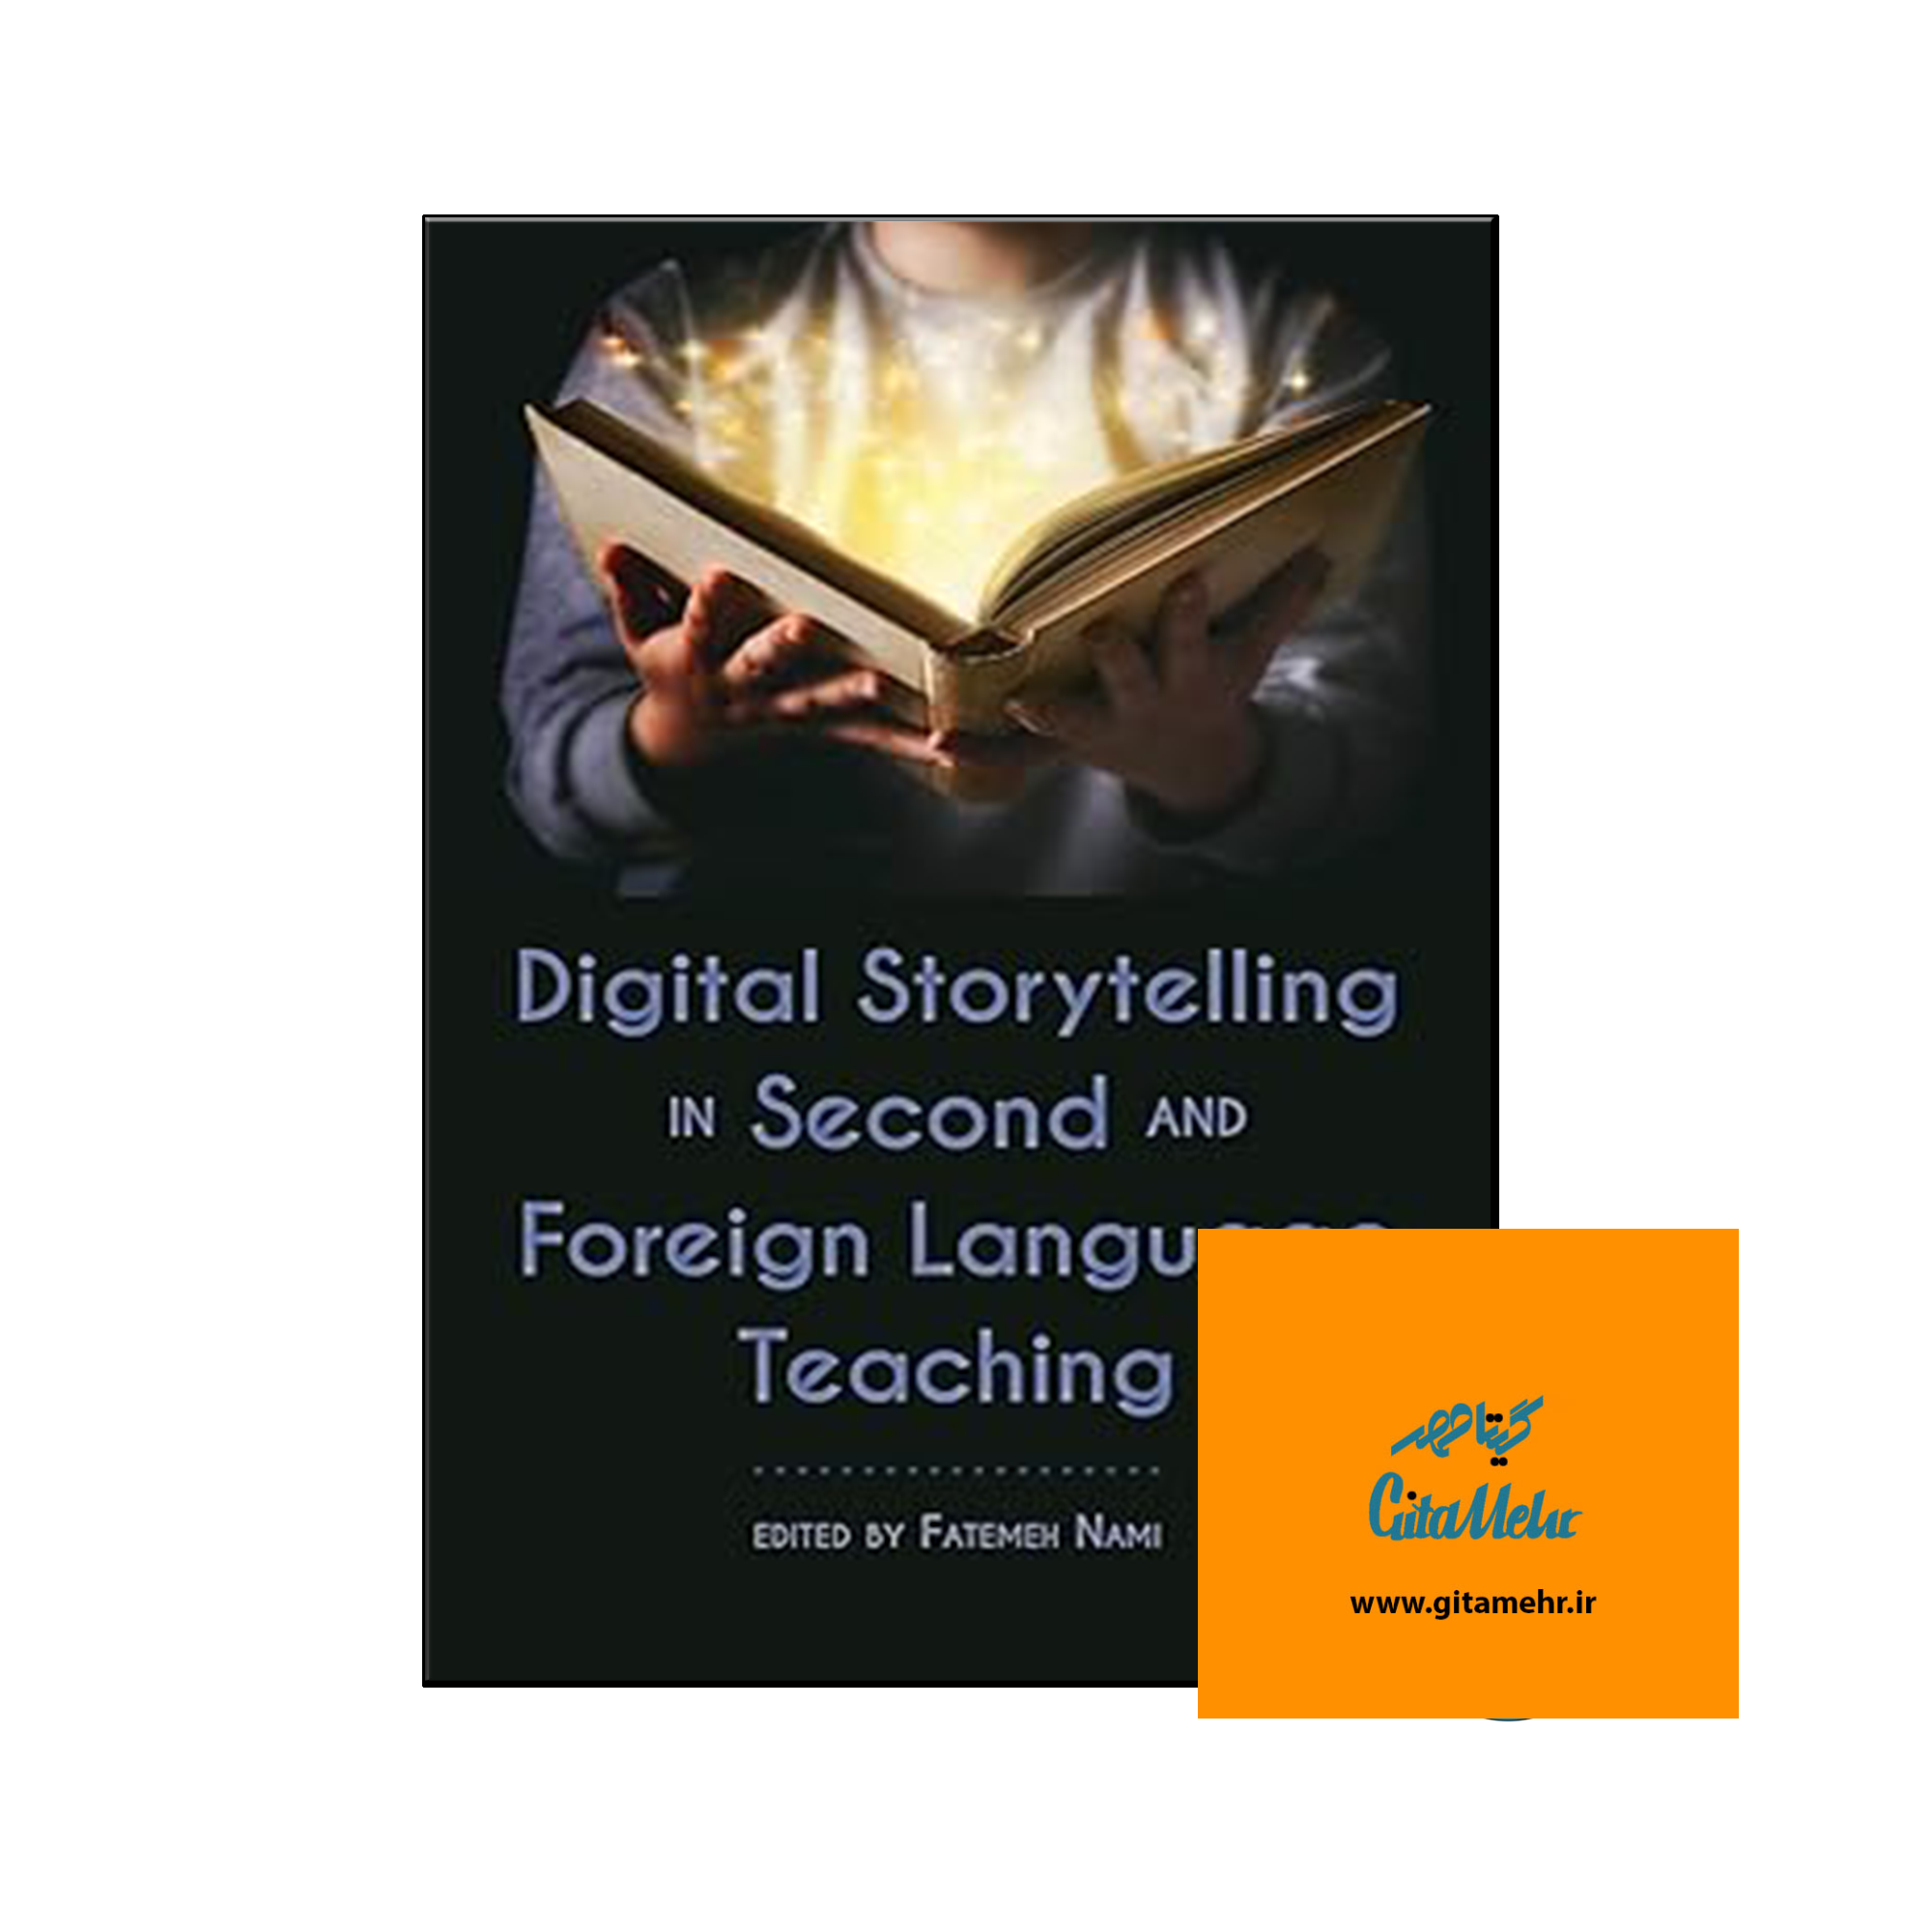 daa9d8aad8a7d8a8 digital storytelling in second and foreign language teaching 65ecafe4003a5